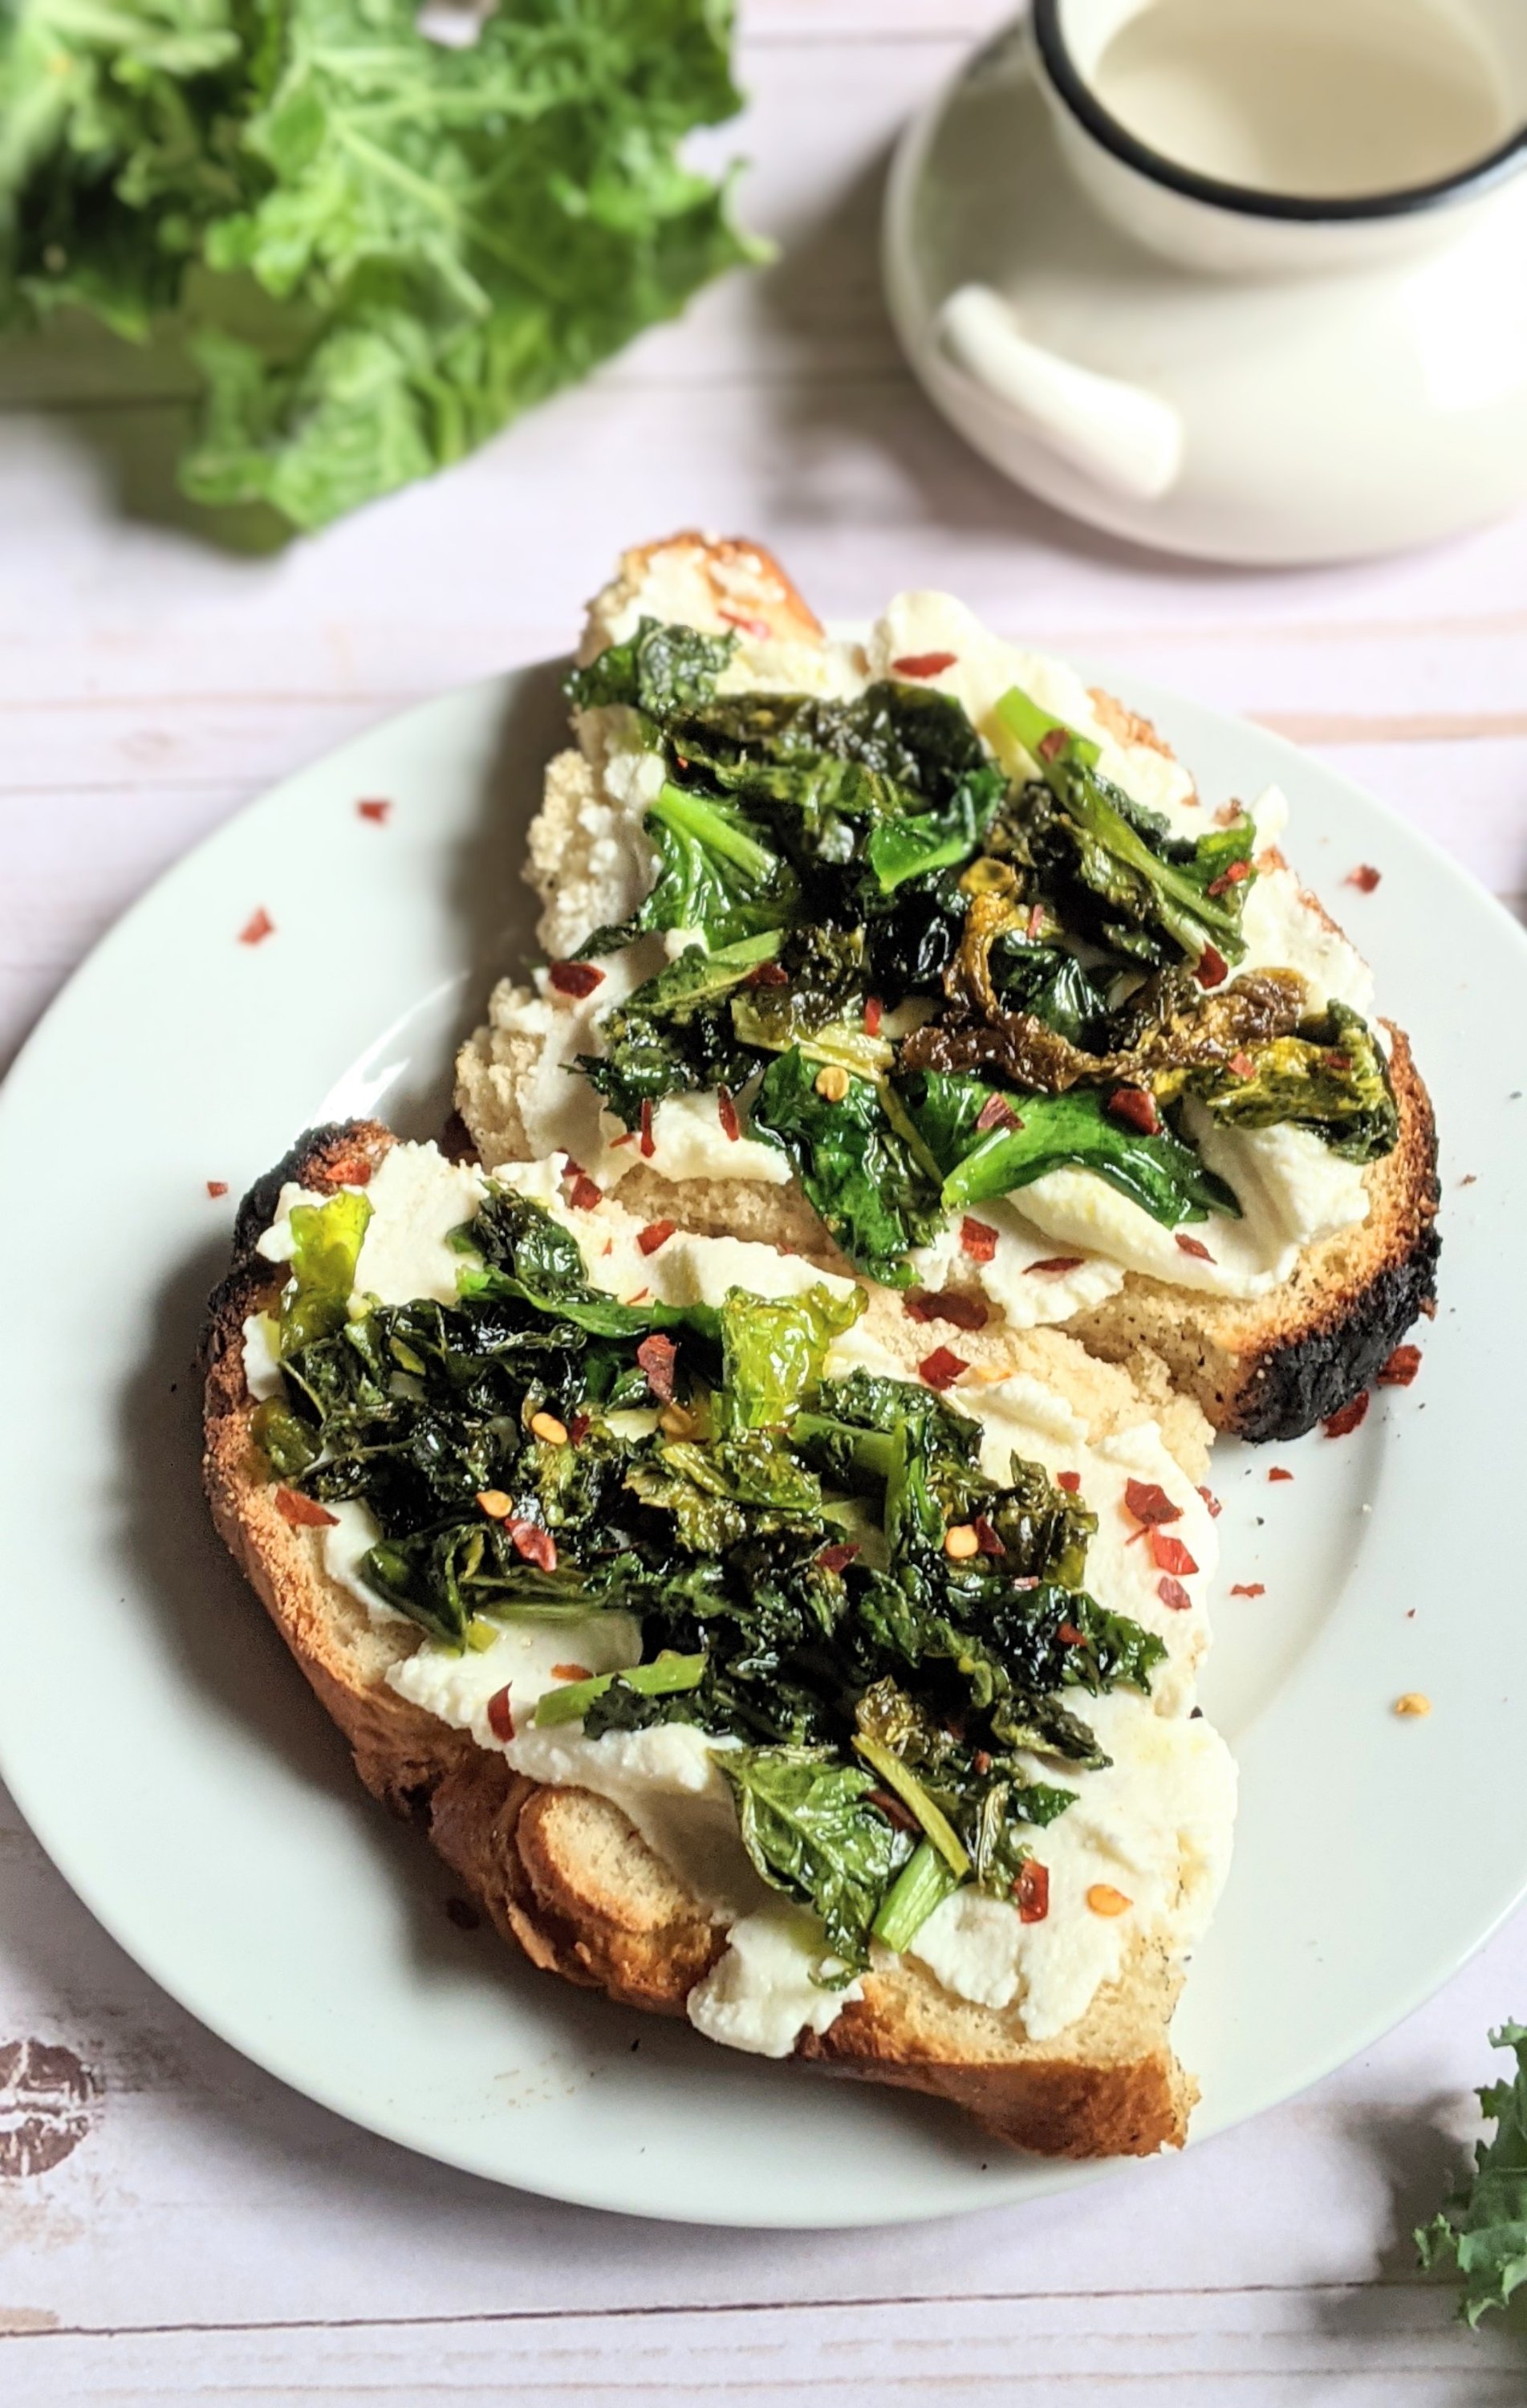 vegetarian kale ricotta toast recipes meatless breakfast ideas with sauteed kale for breakfast for dinner brinner recipes healthy loaded toast recipes for brunch savory recipes with kale for brunch how to eat kale for breakfast